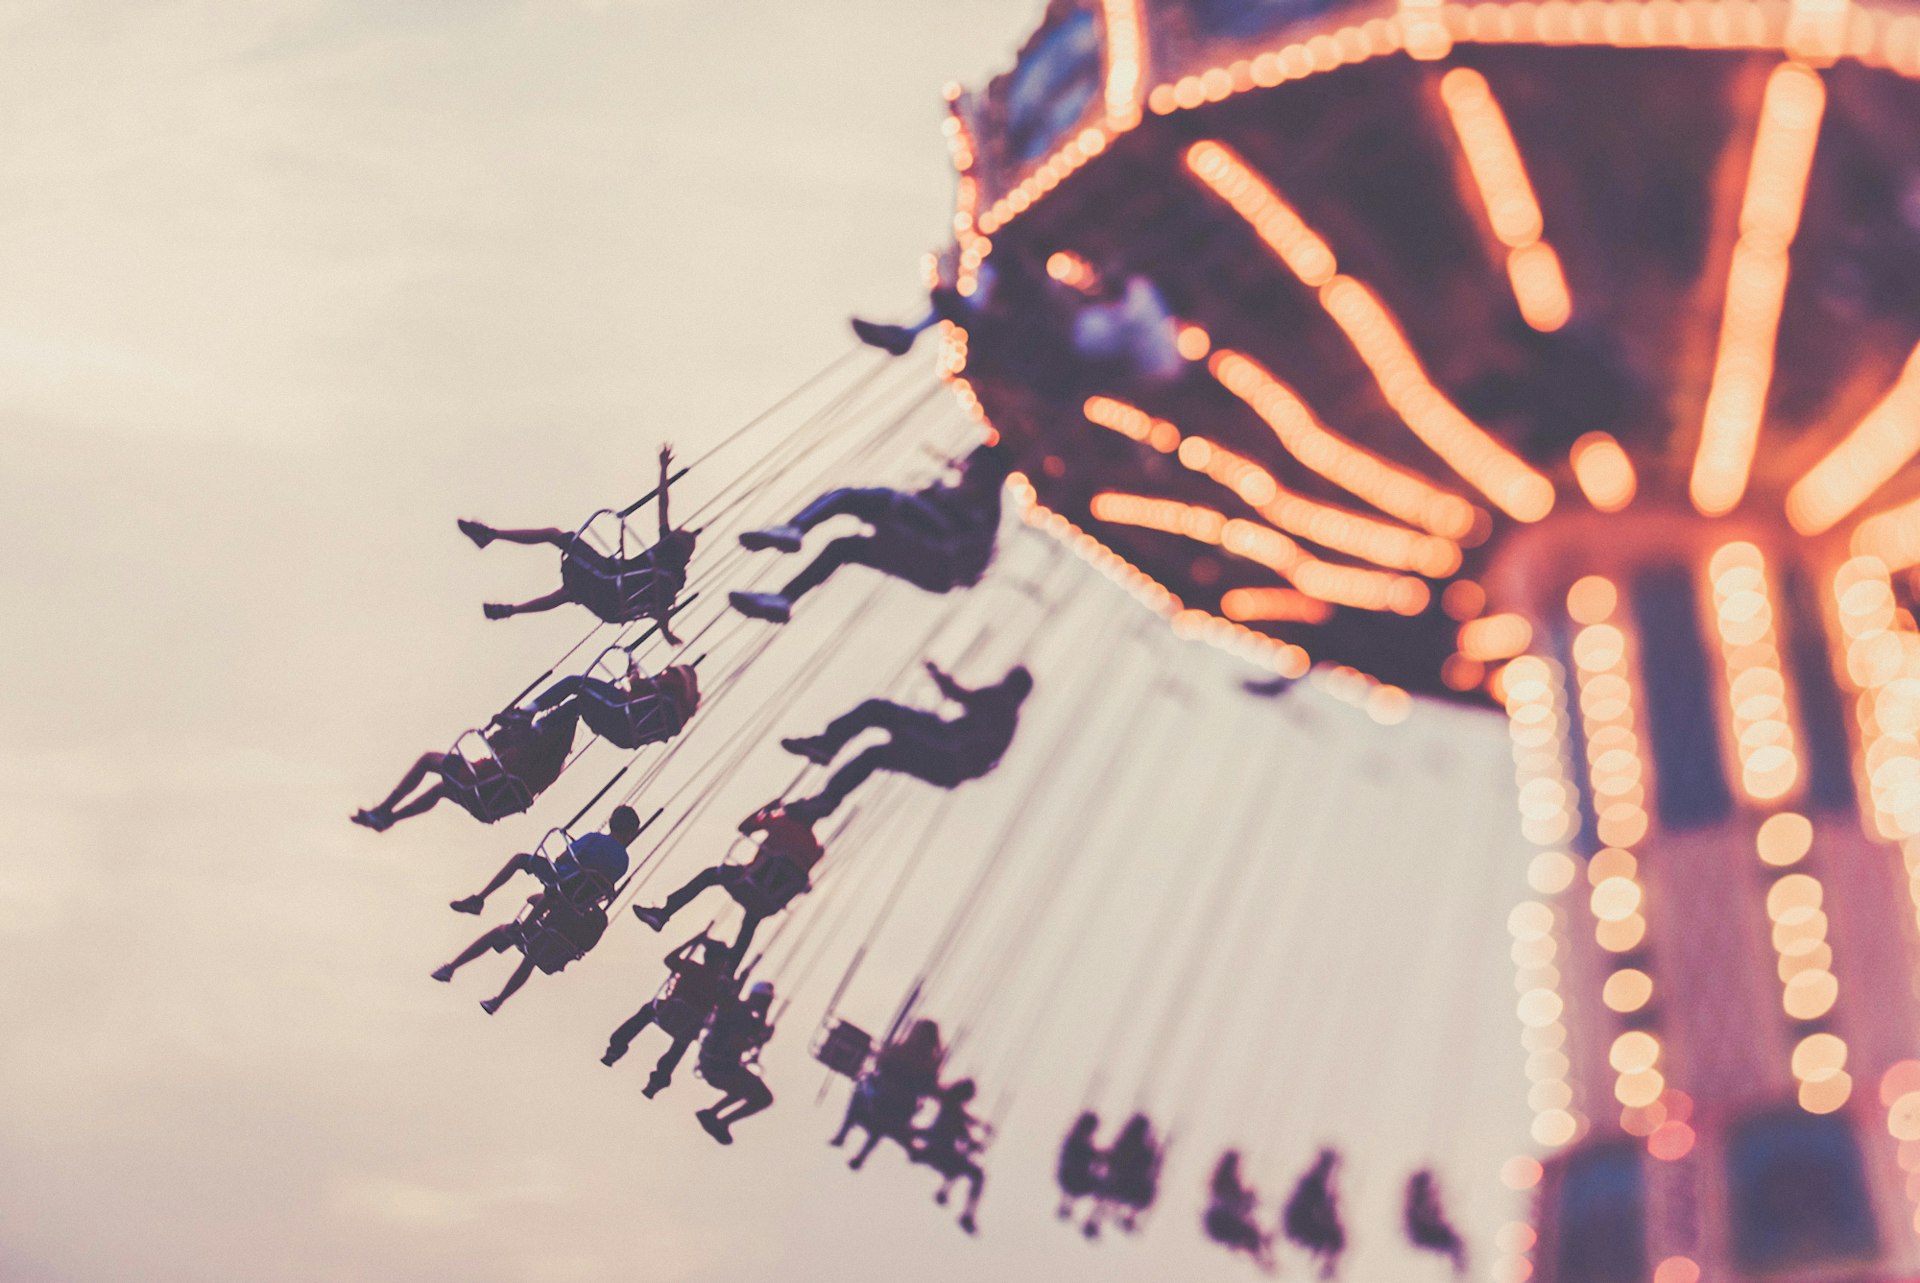 People hanging from a fairground ride.